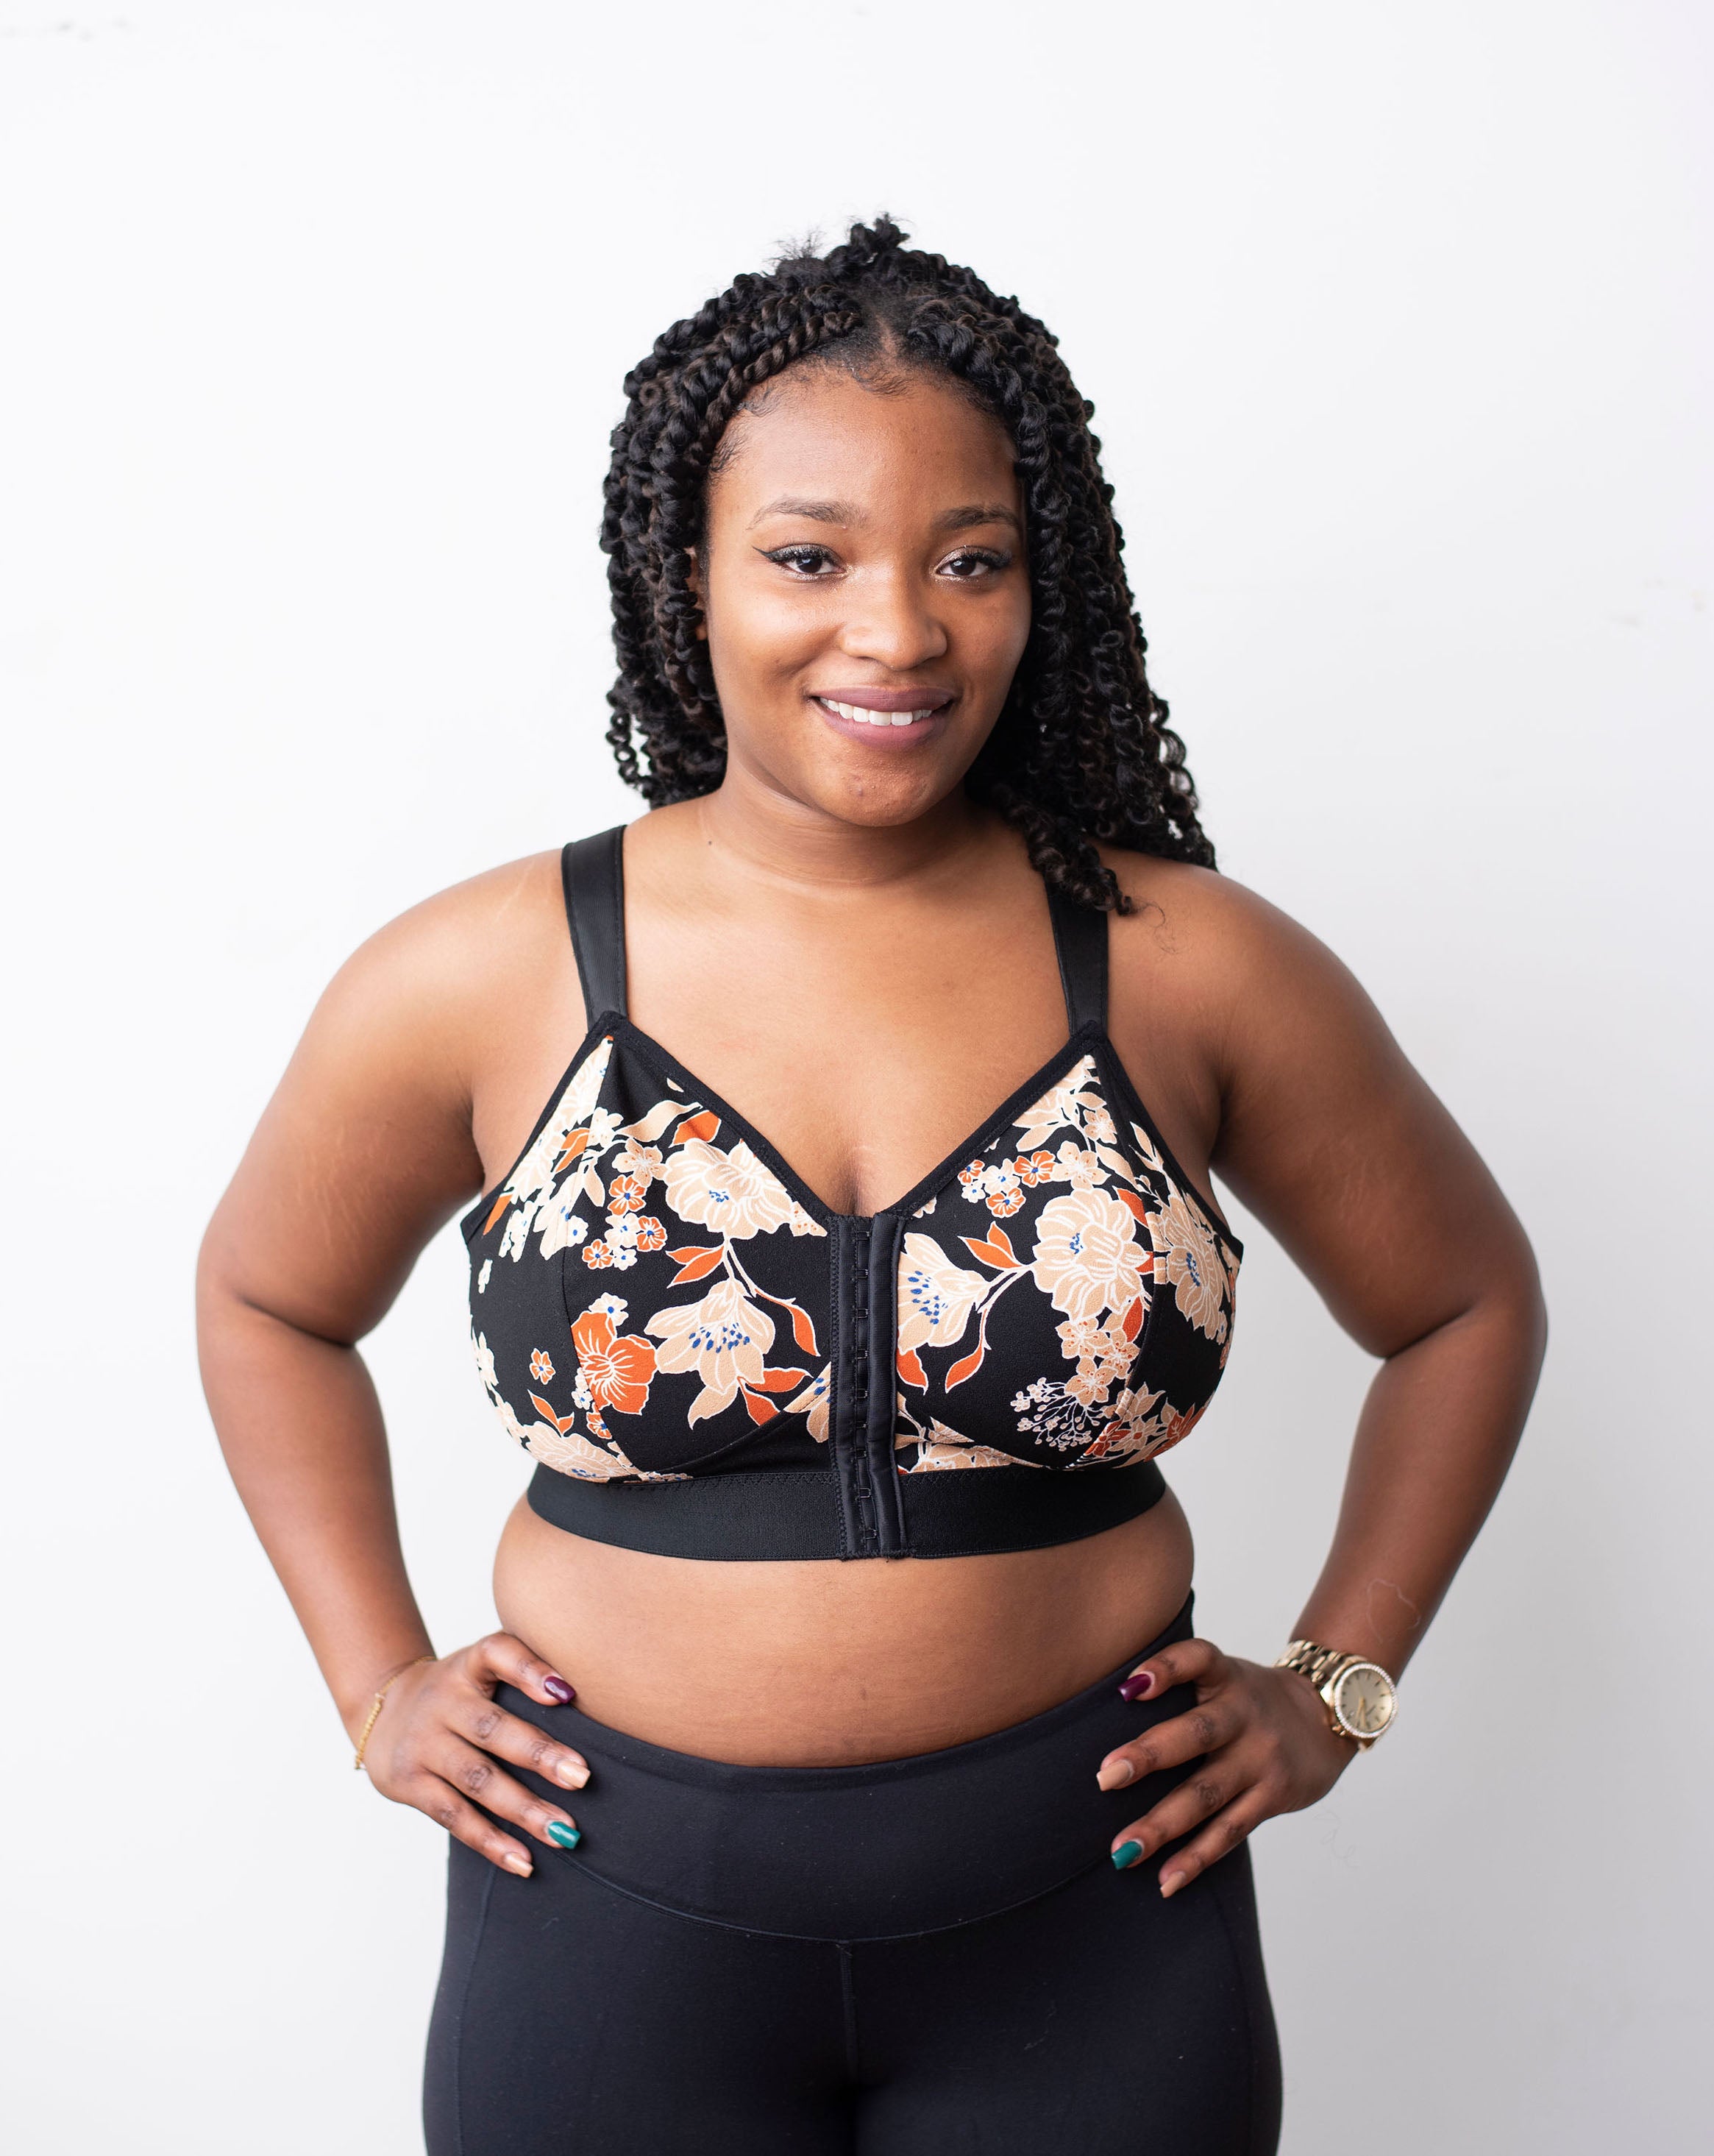 Rubies Bras client and model wearing our Mastectomy specialty bra.